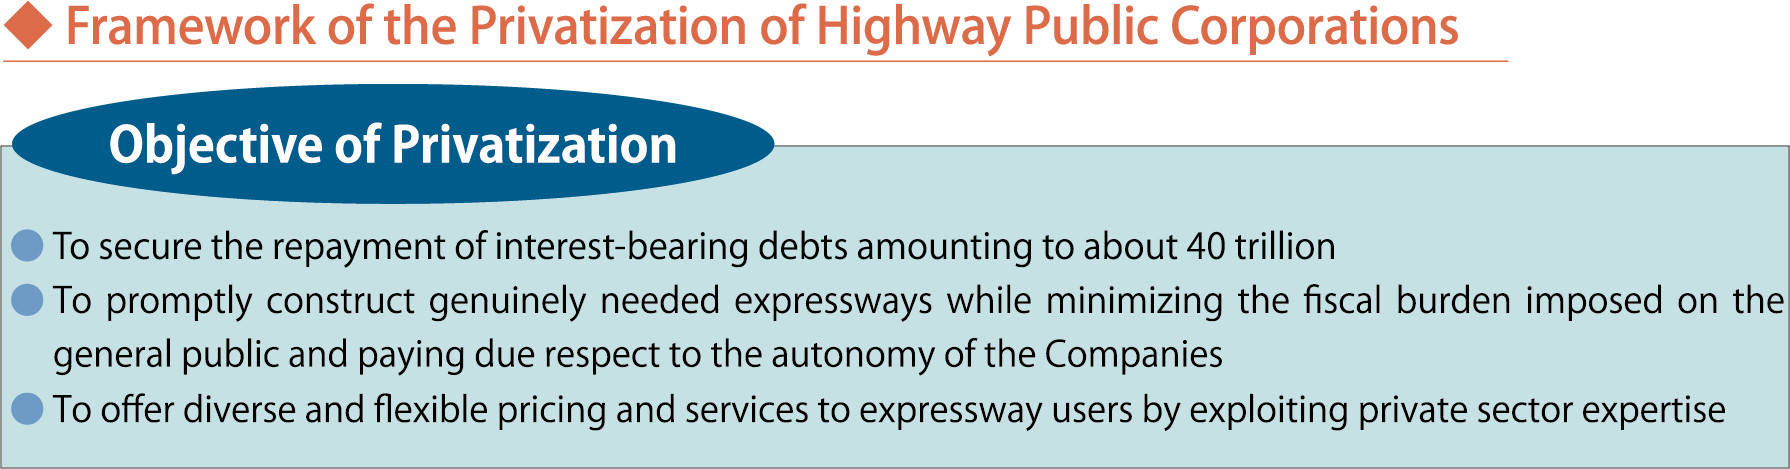 Framework of the Privatization of Highway Public Corporations